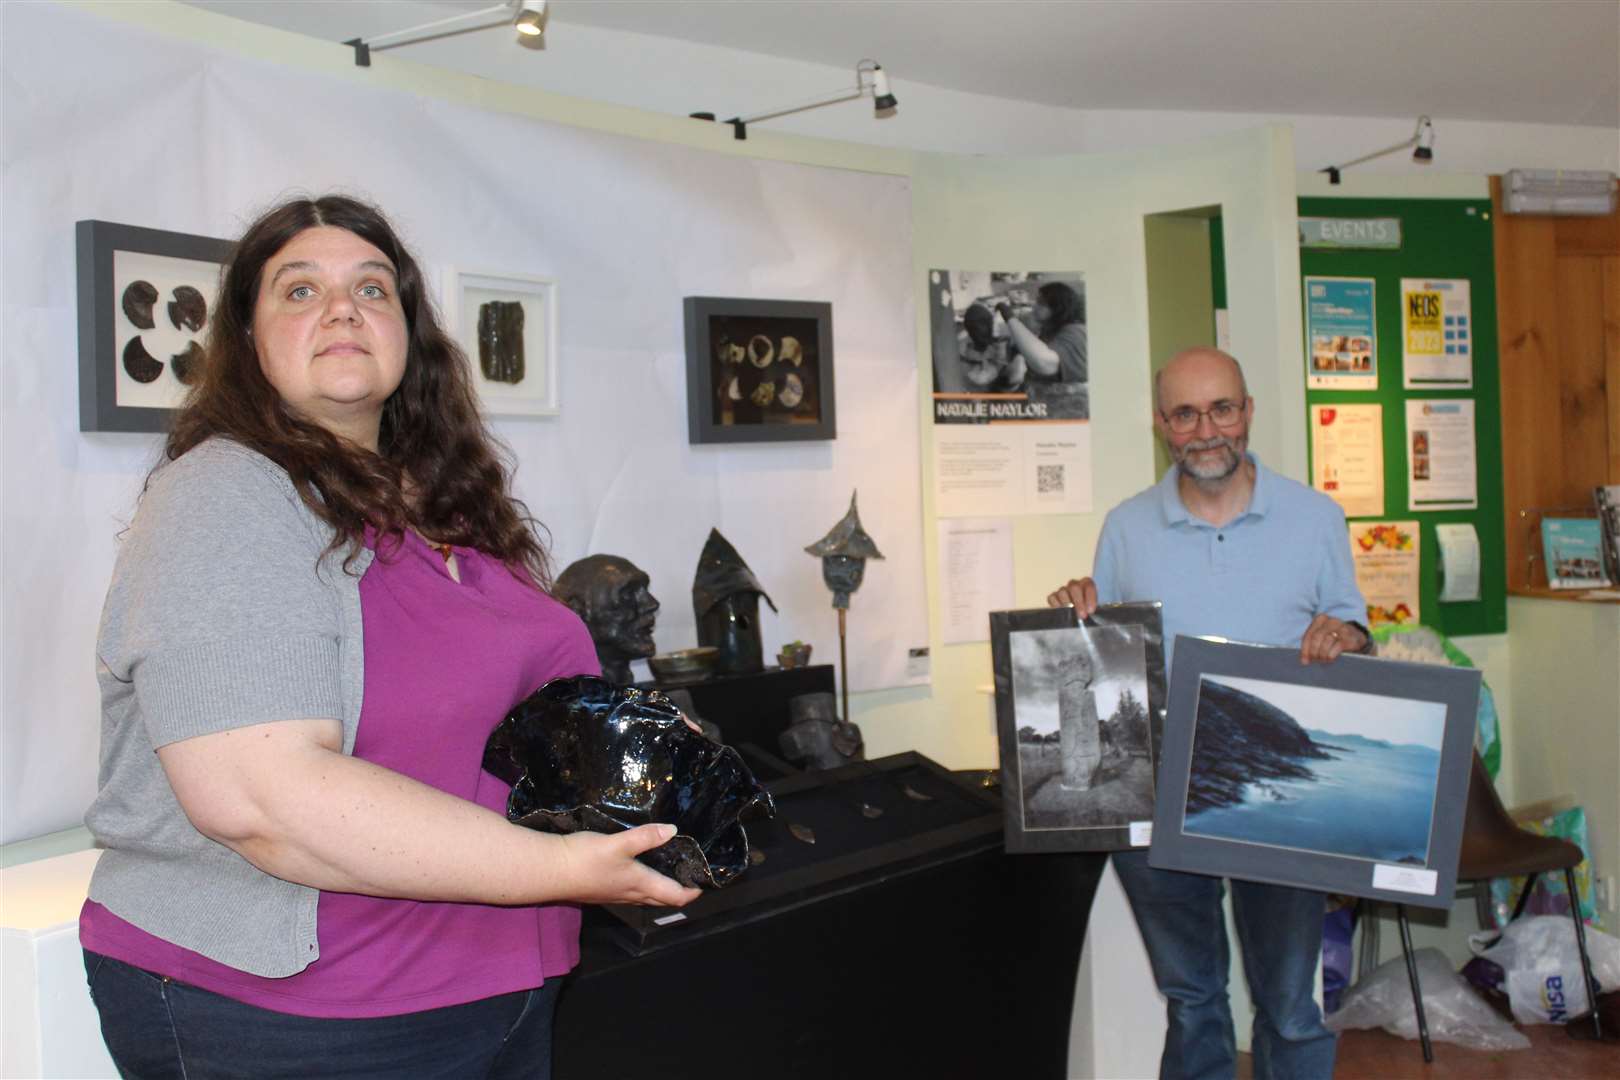 Ceramacist Natalie Naylor and photographer Richard Salway are showing their work as part of NEOS week at the Bennachie visitors centre. Picture: Griselda McGregor